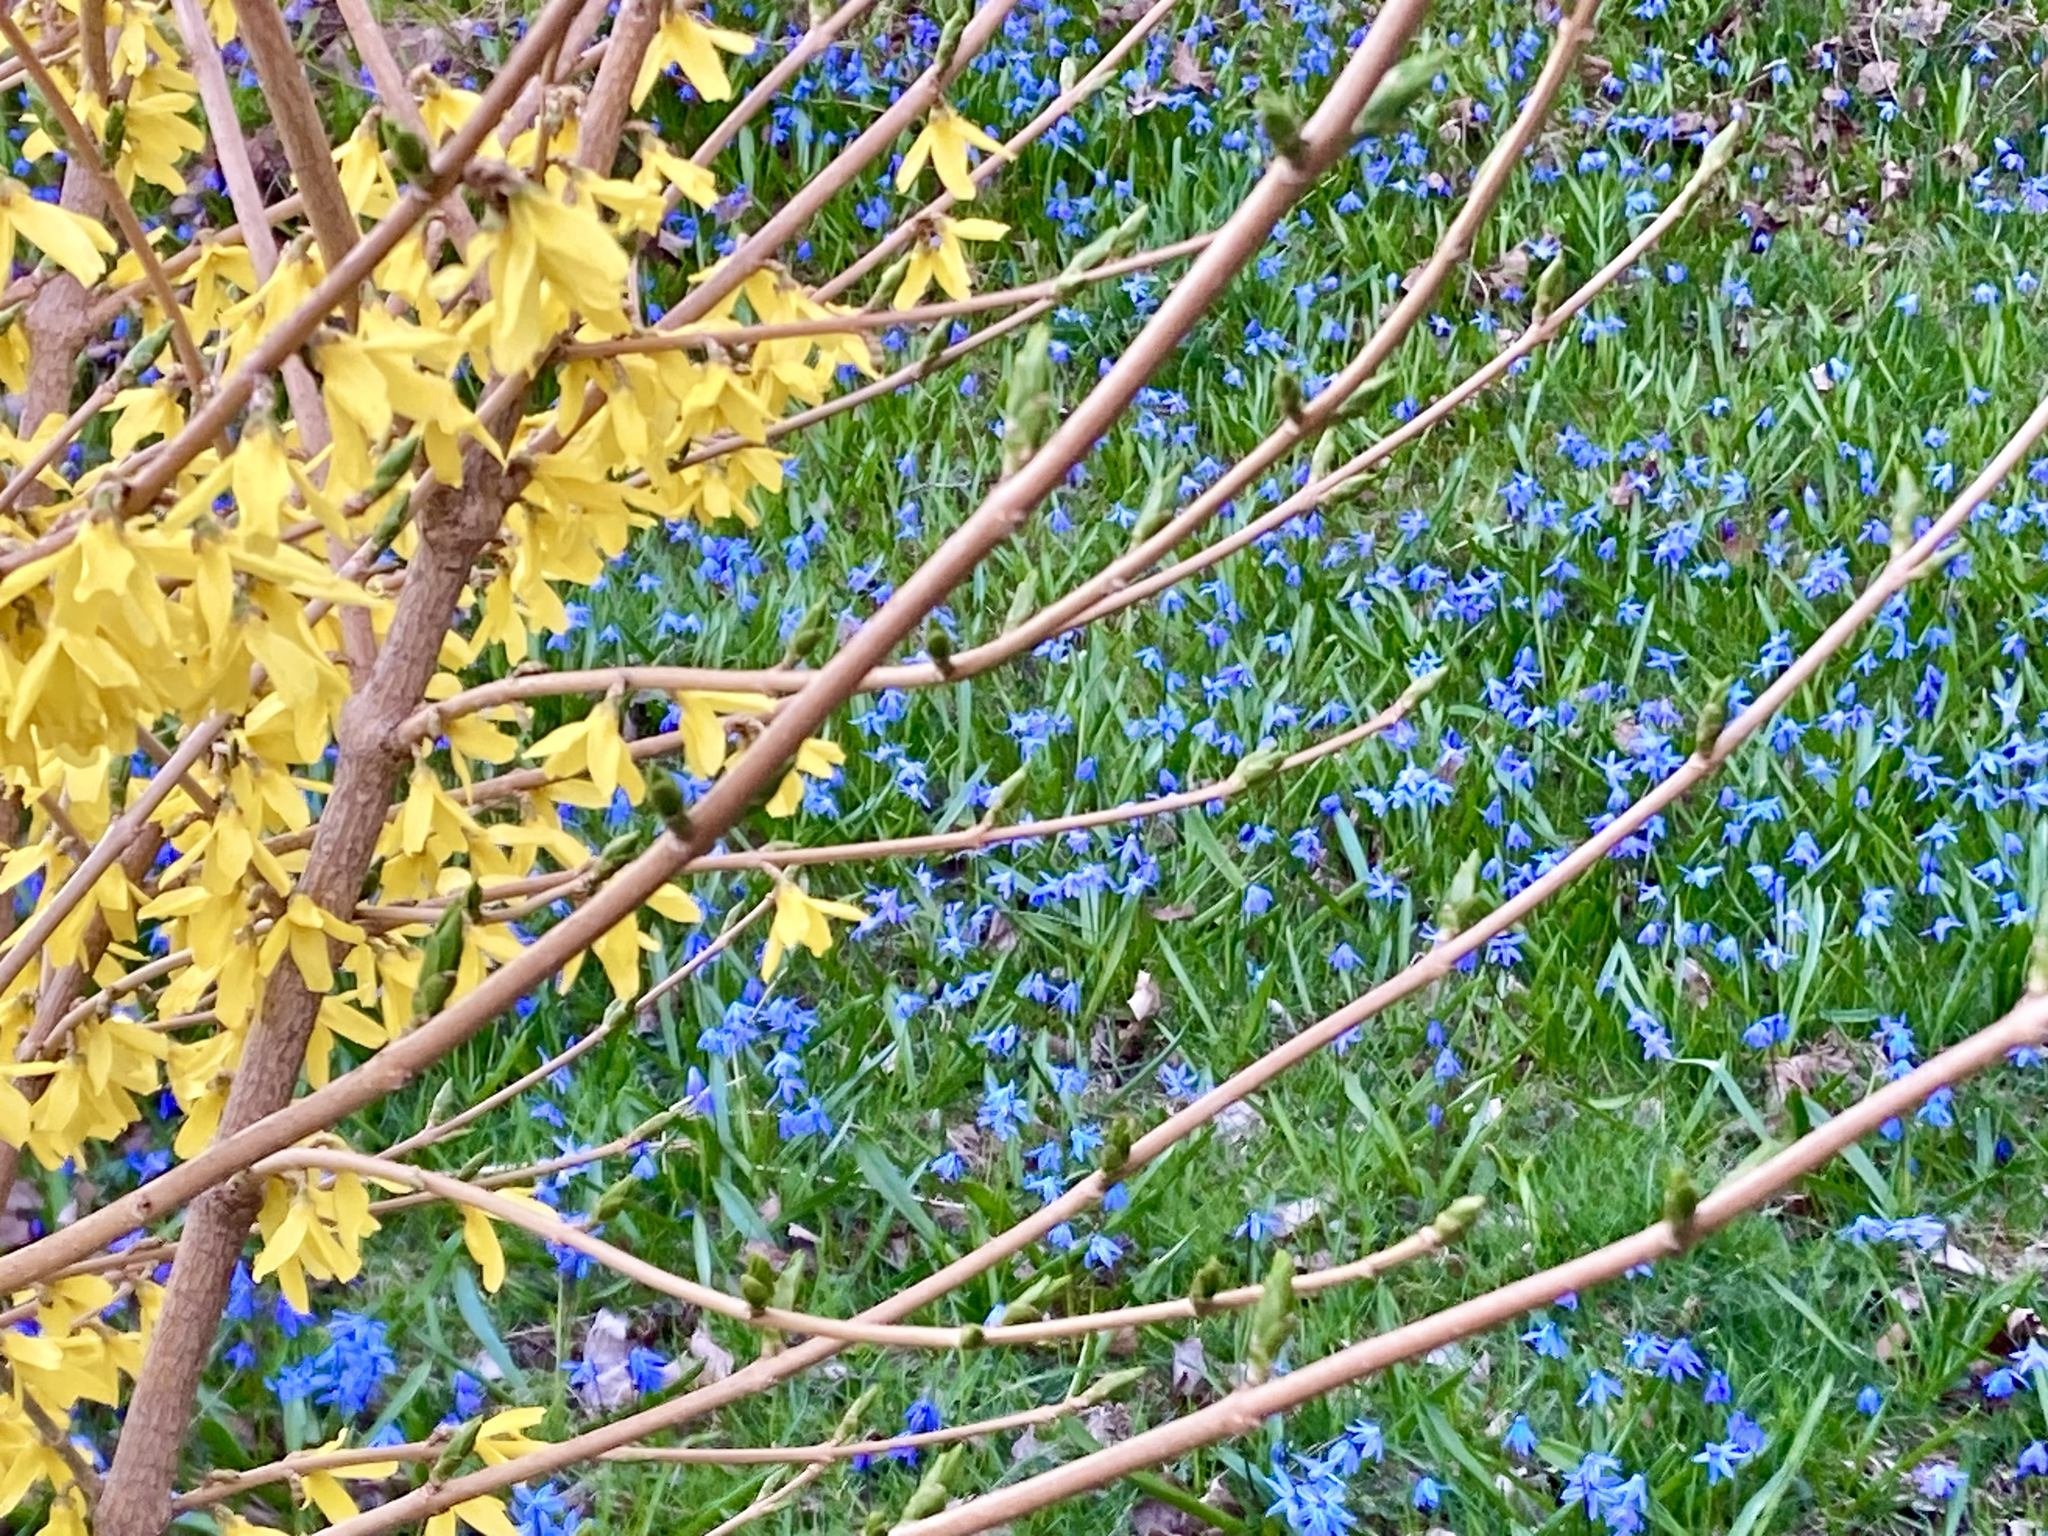 Spring brings us yellows and blues! Take a walk around town and see all the Forsythia (the yellow flowered shrub) and gorgeous blue Squill (Scilla siberica). Nature blankets herself in colors. ❤️. #flowersplusny #urbanlandscape #adklife #iloveny #wes